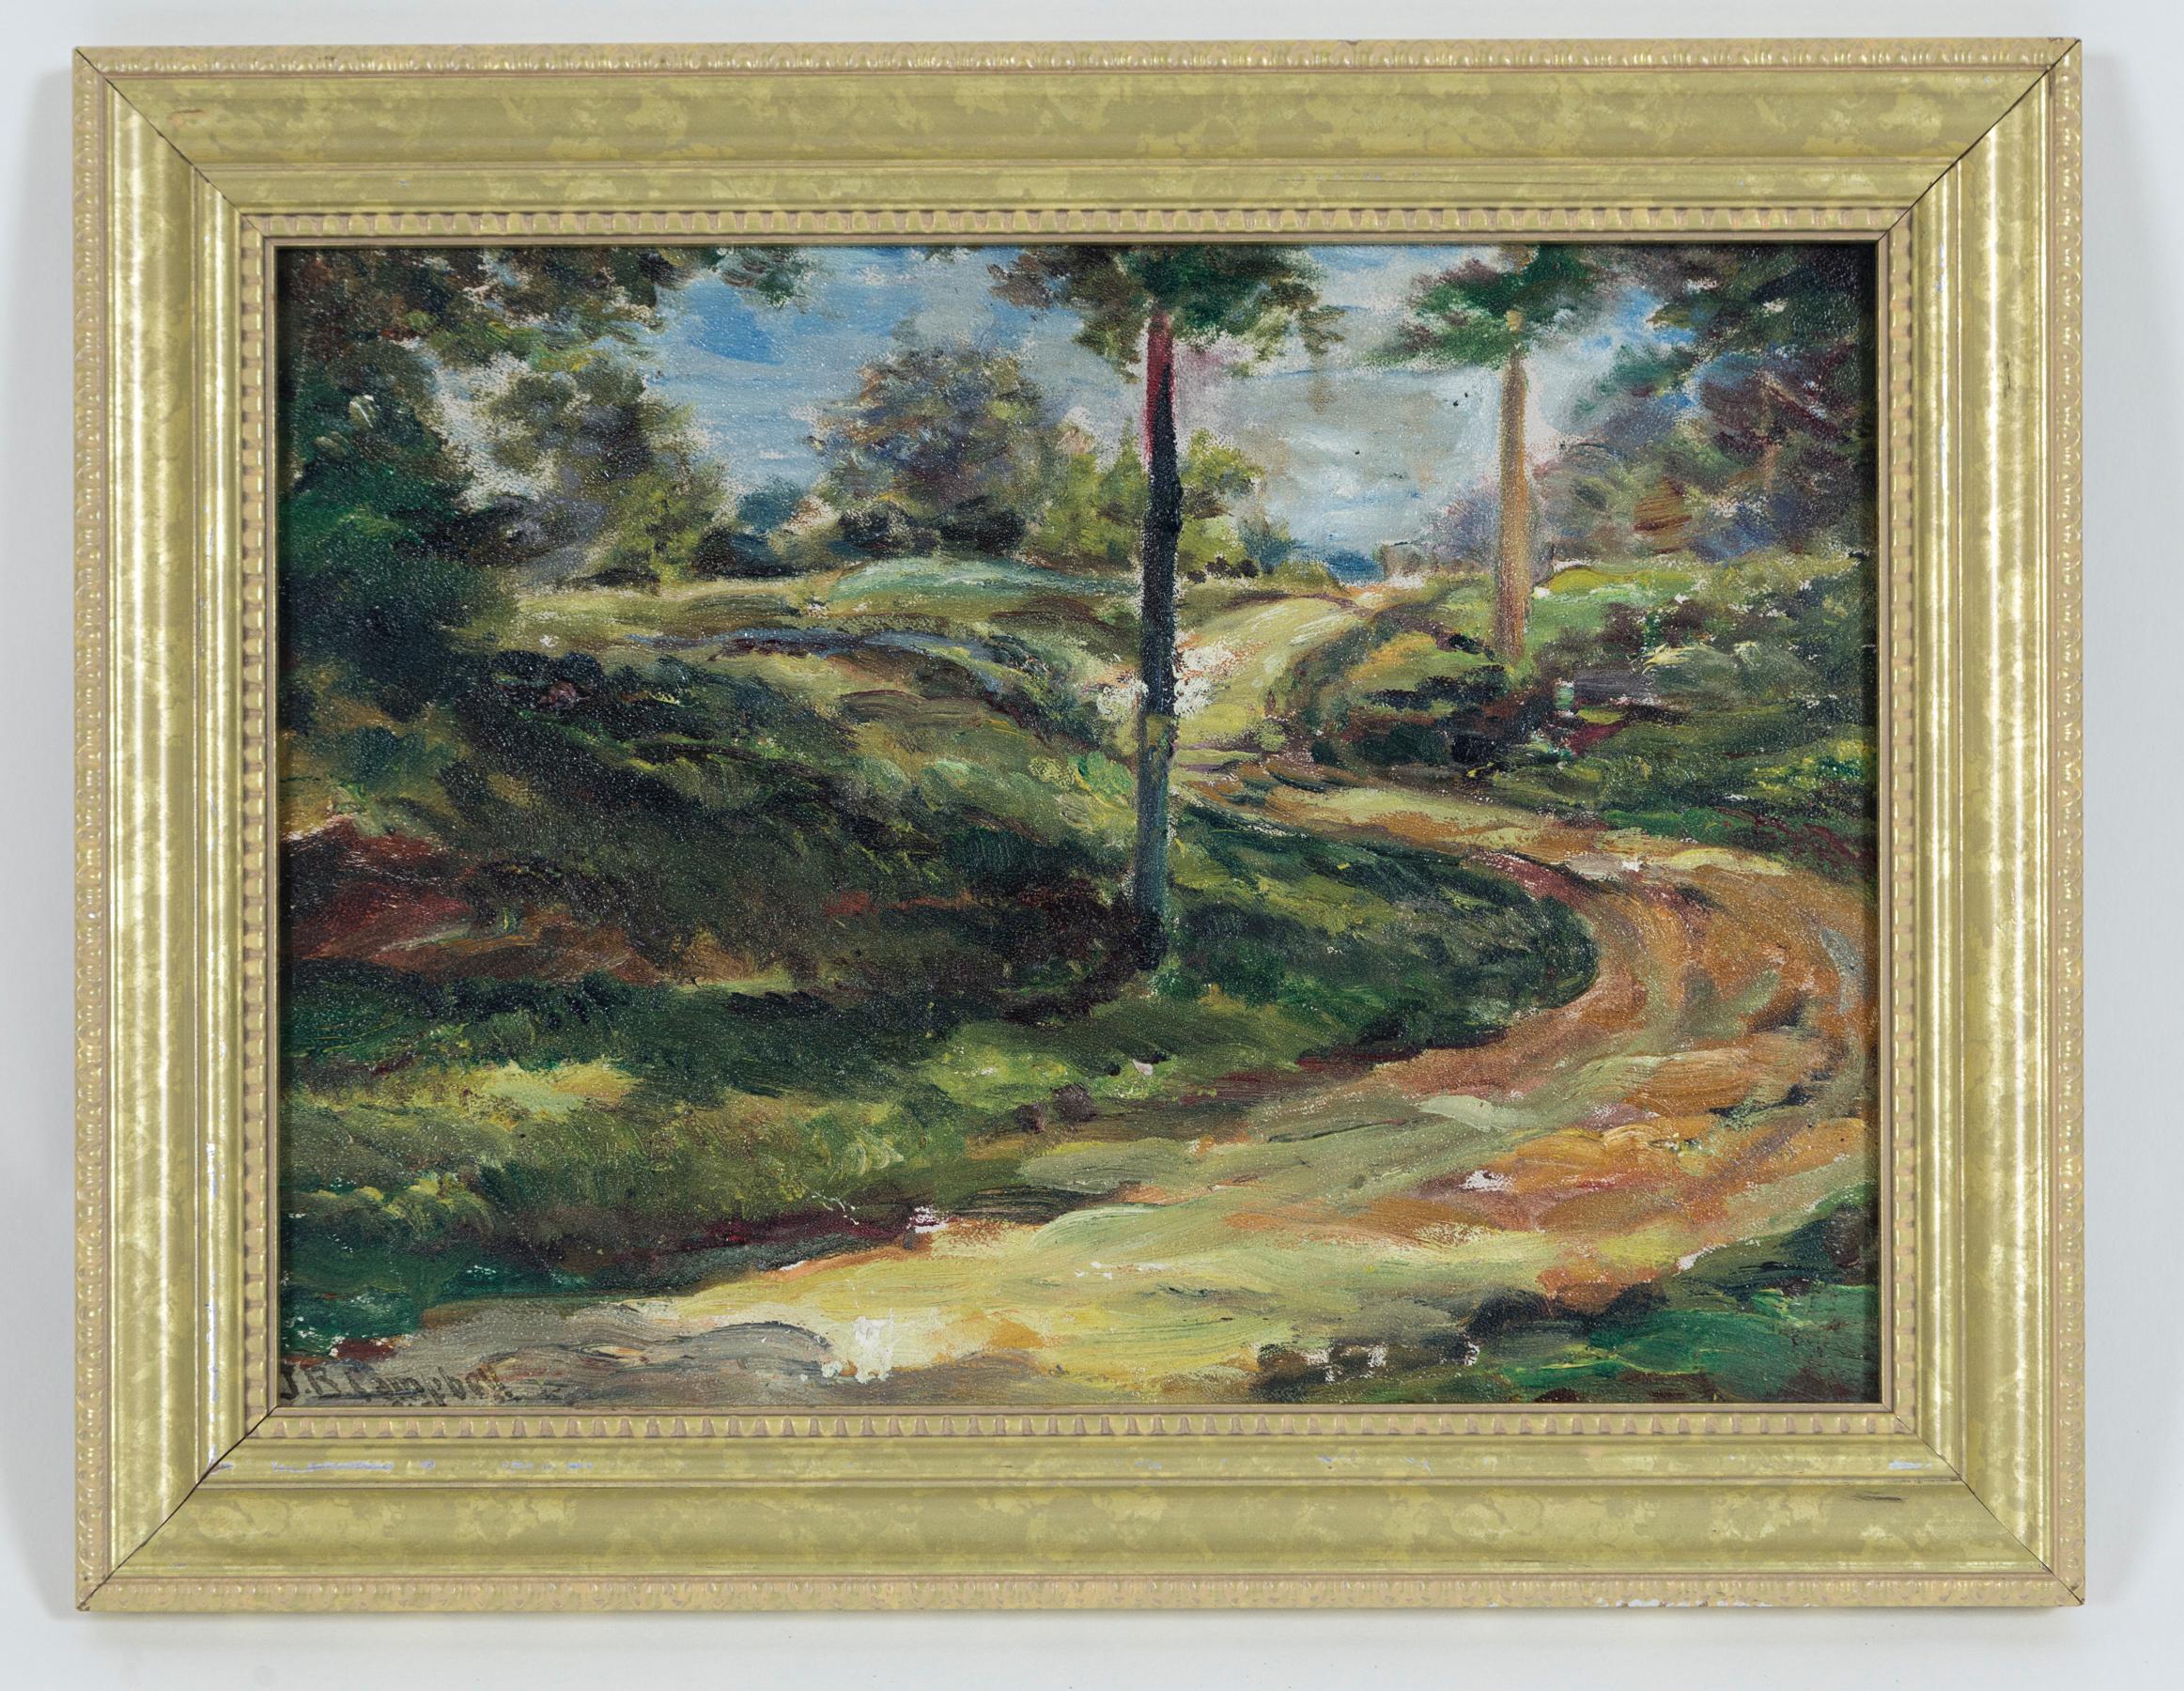 American School oil on board landscape painting, 19th century. A charming impressionist woodland landscape. Signature on lower left reads J.B. Campbell.
Label on back from F. W. Devoe, Artists Supplies, New York City.